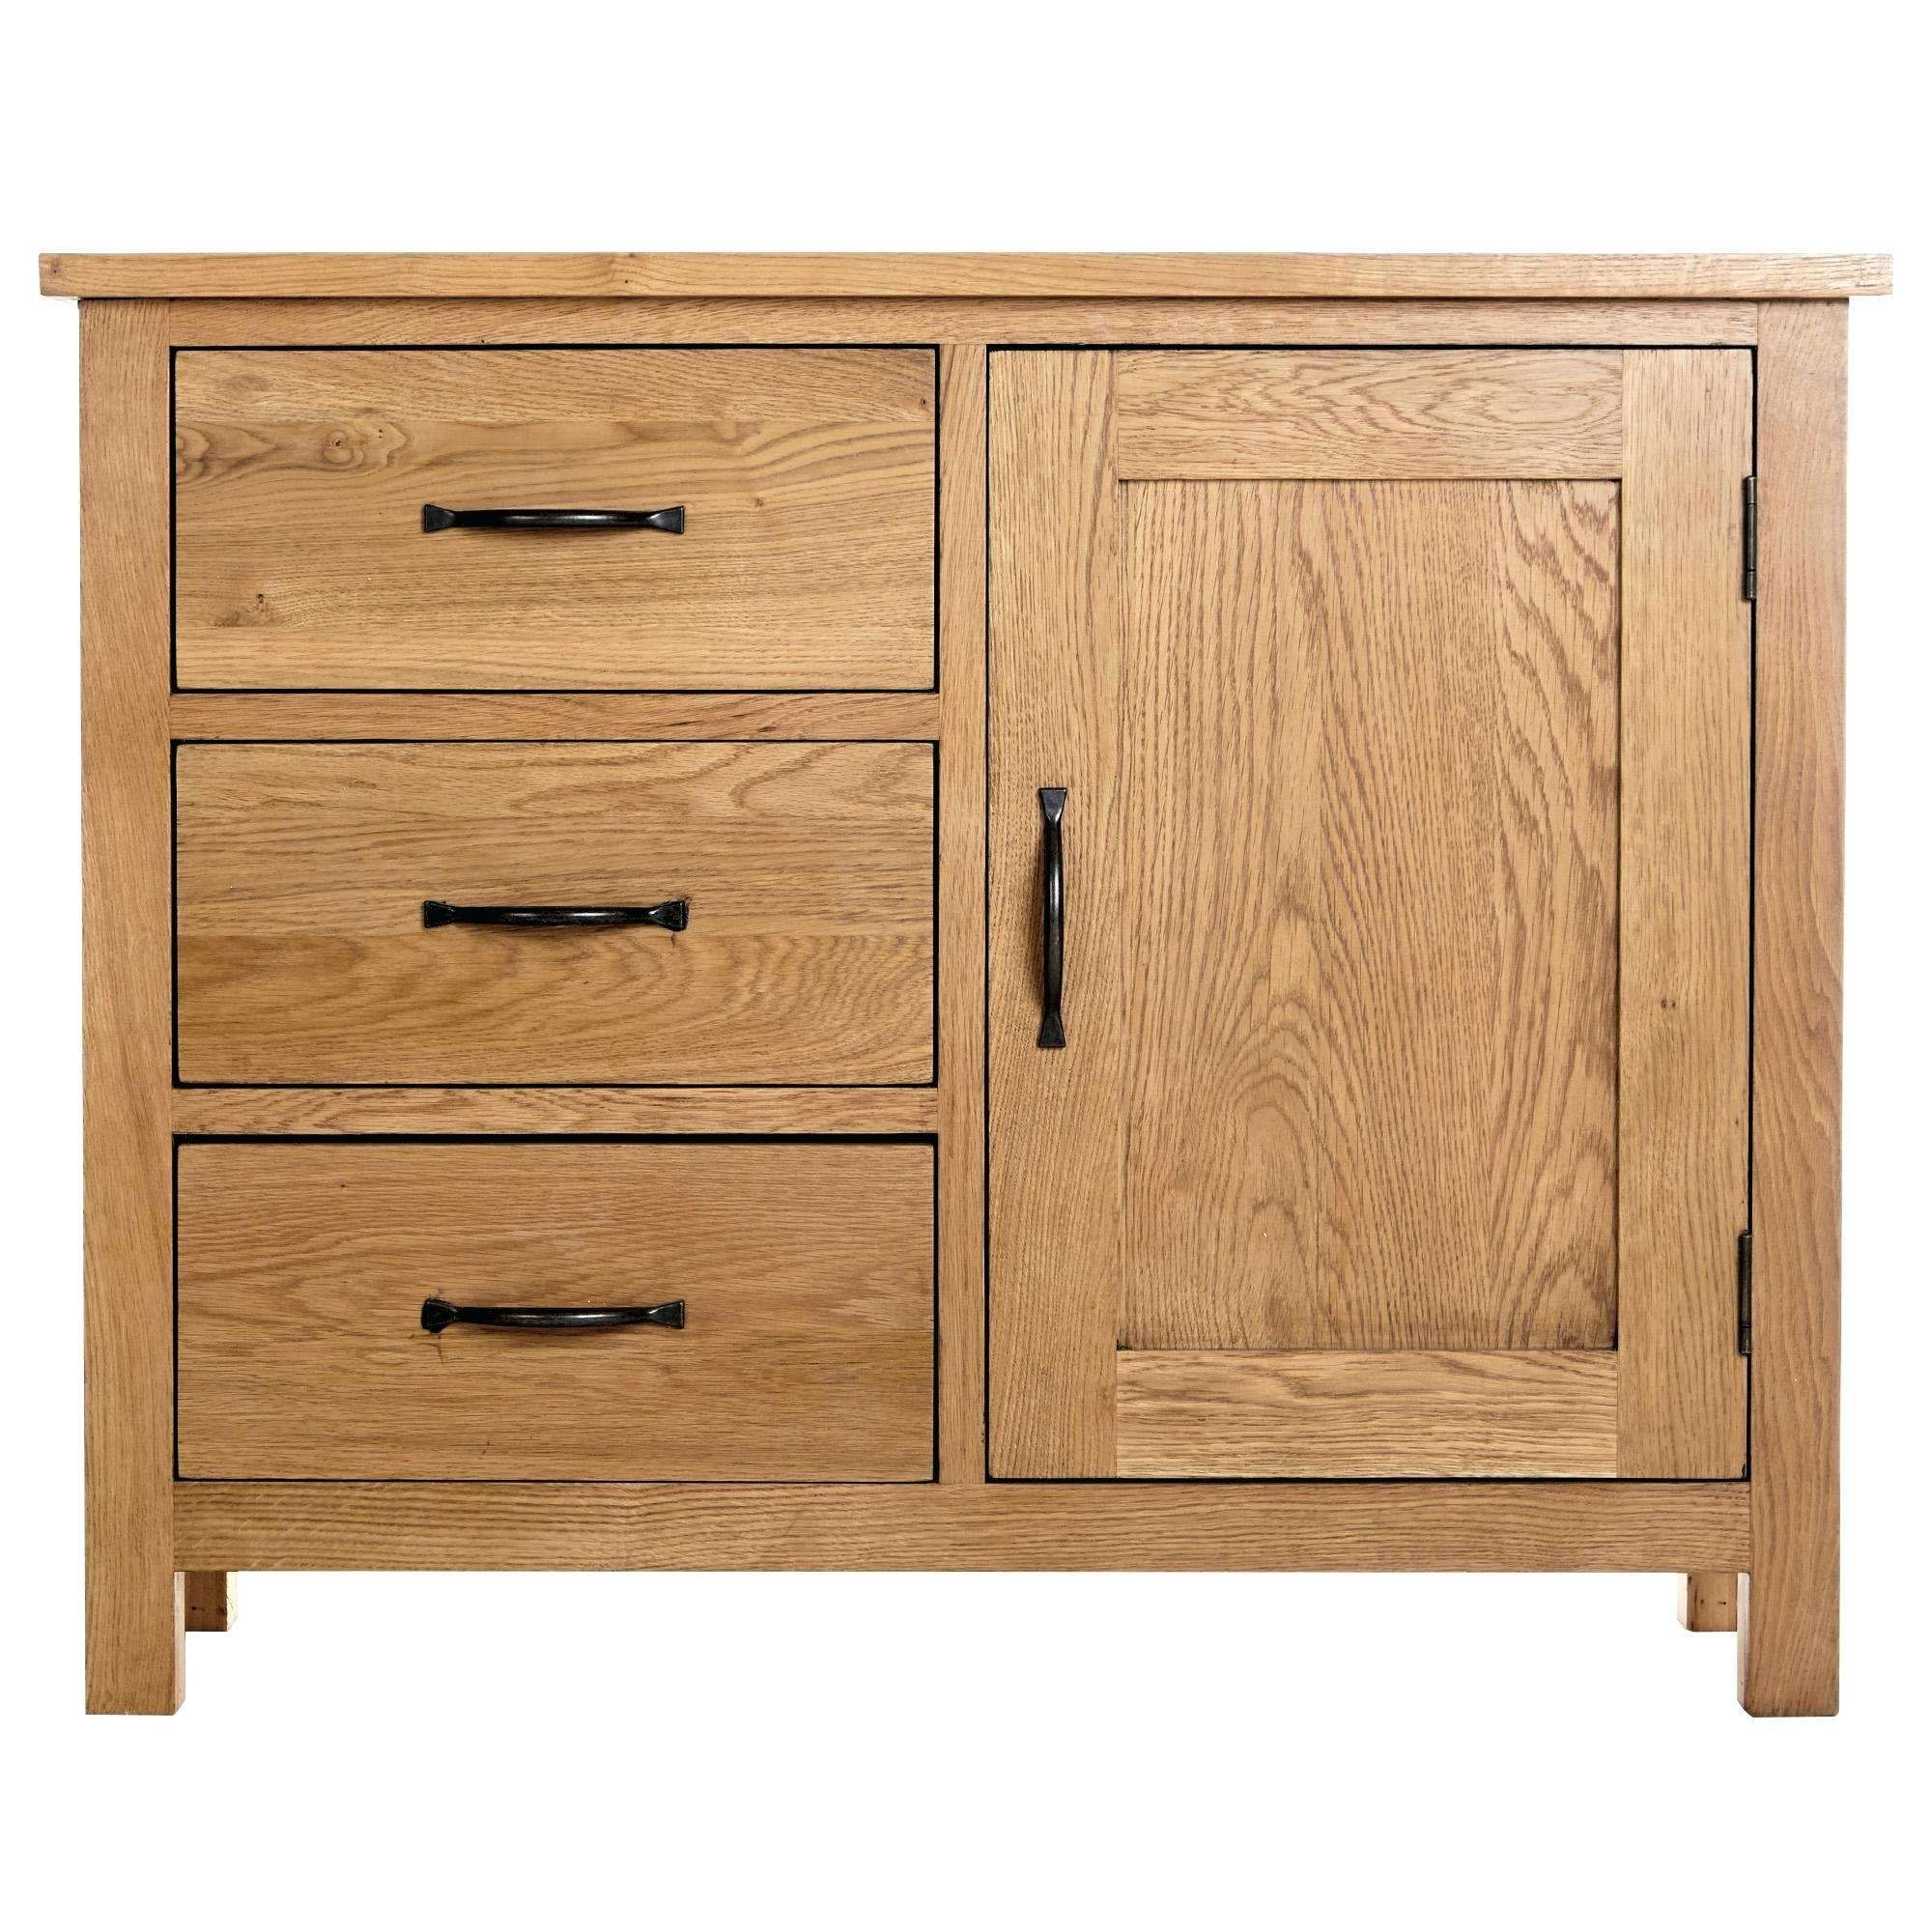 Wooden Sideboards Antique Wooden Sideboard Oak Sideboards Uk Pertaining To Solid Wood Sideboards (View 10 of 20)